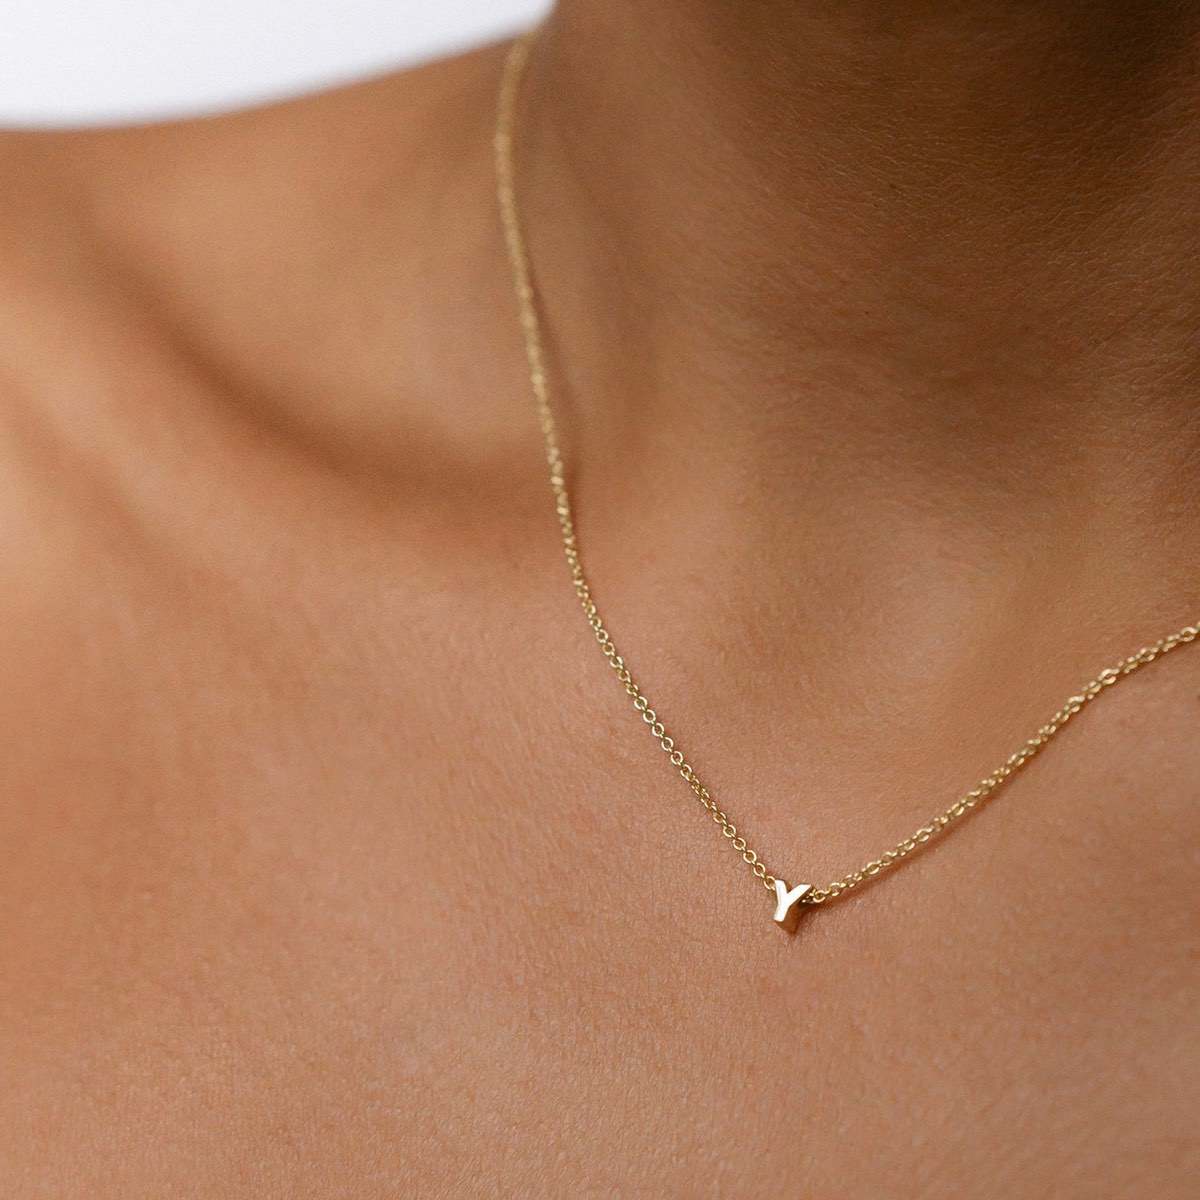 Hand finished solid gold letter necklace: Close up of a model wearing our beautiful 9ct yellow gold Tiny Letter Y Charm Necklace with a 40cm cable chain